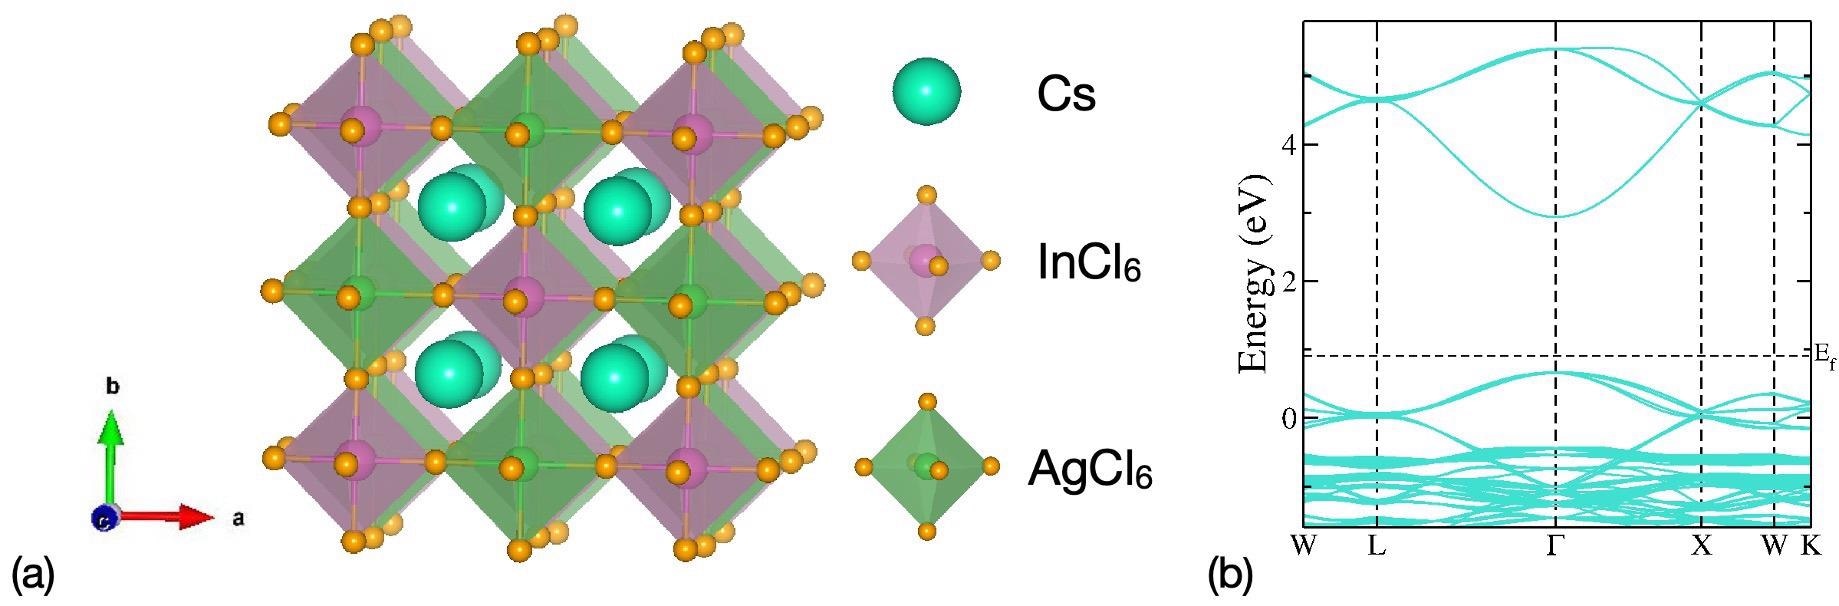 (a) Crystal structure of Cs2AgInCl6 double perovskite and (b) bandstructure of Cs2AgInCl6 using G0W0@HSE06. Ef is fermi energy level.